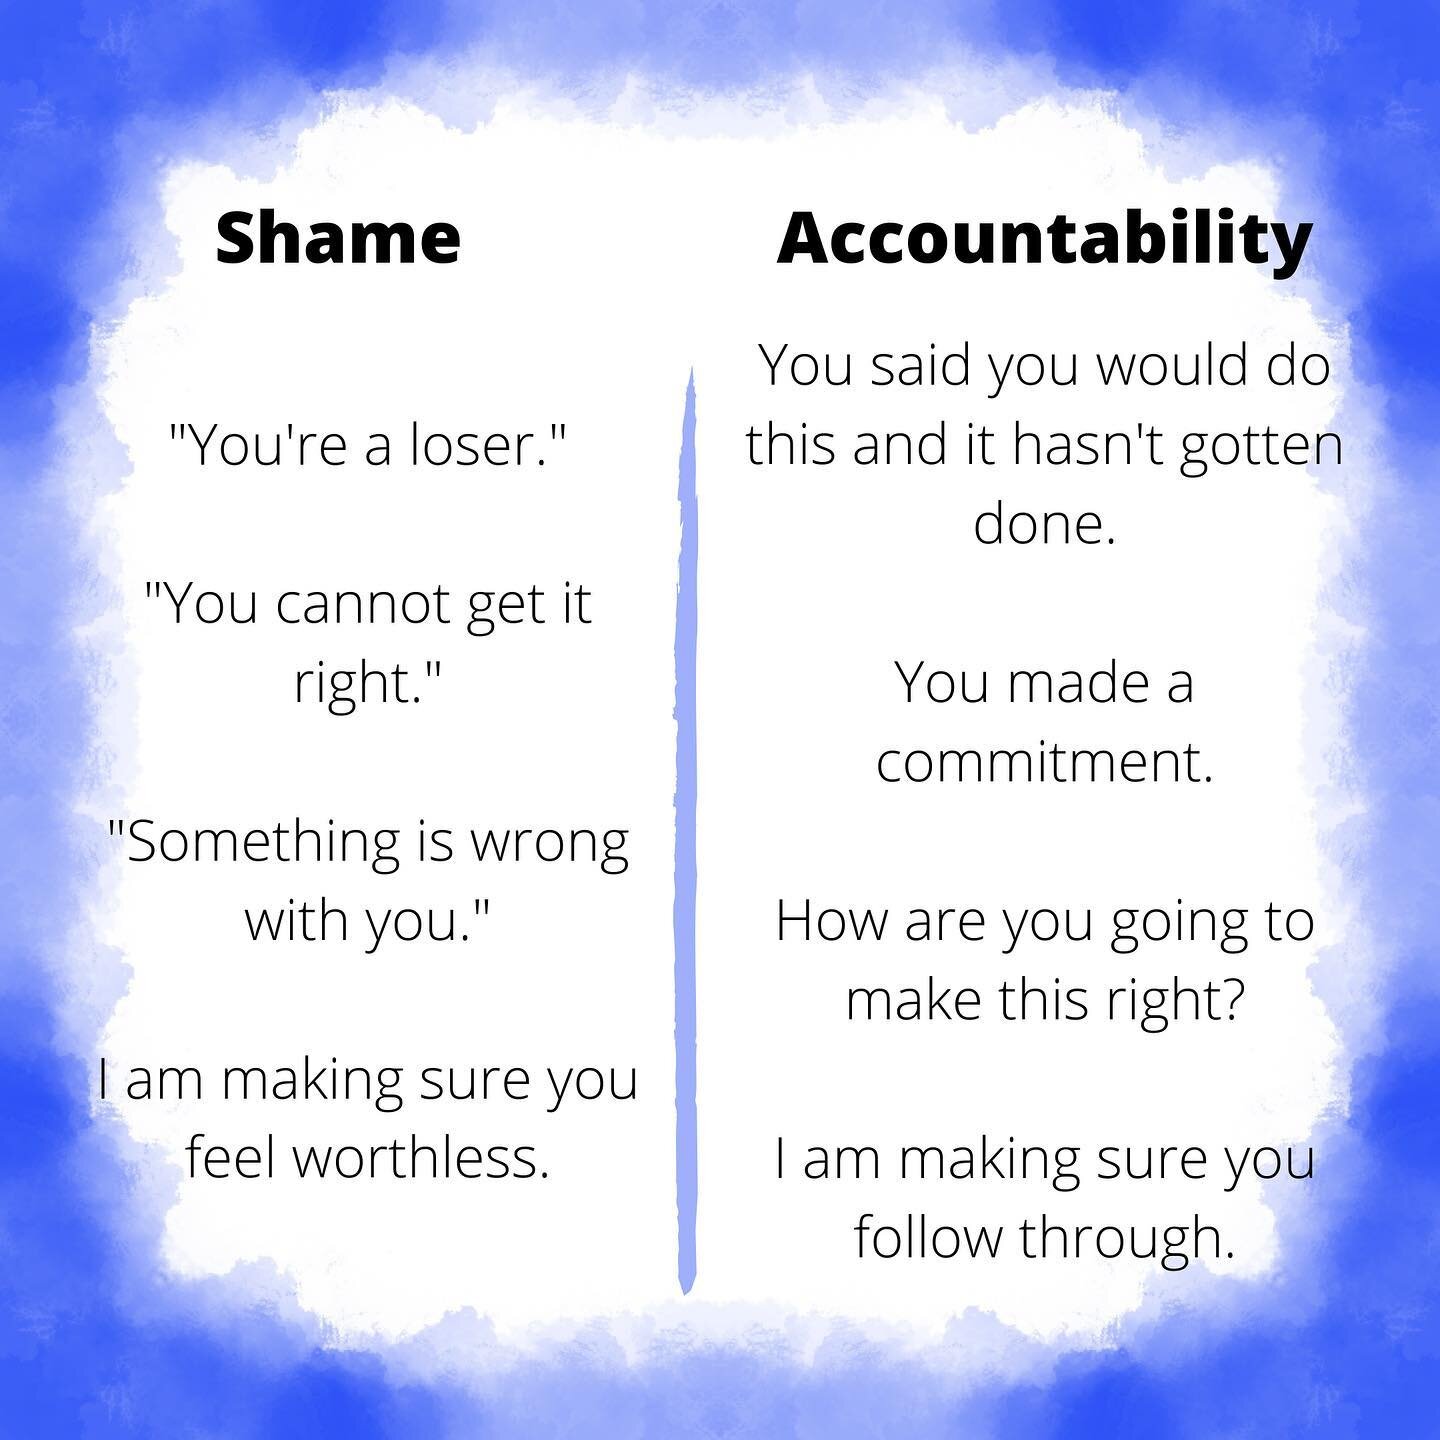 We can hold others accountable to their commitments without shaming them. We can hold ourselves accountable without shame. #relationship #couple #love #relationshipgoals #relationships #couplegoals #therapist #mentalhealthmatters #psychology #counsel